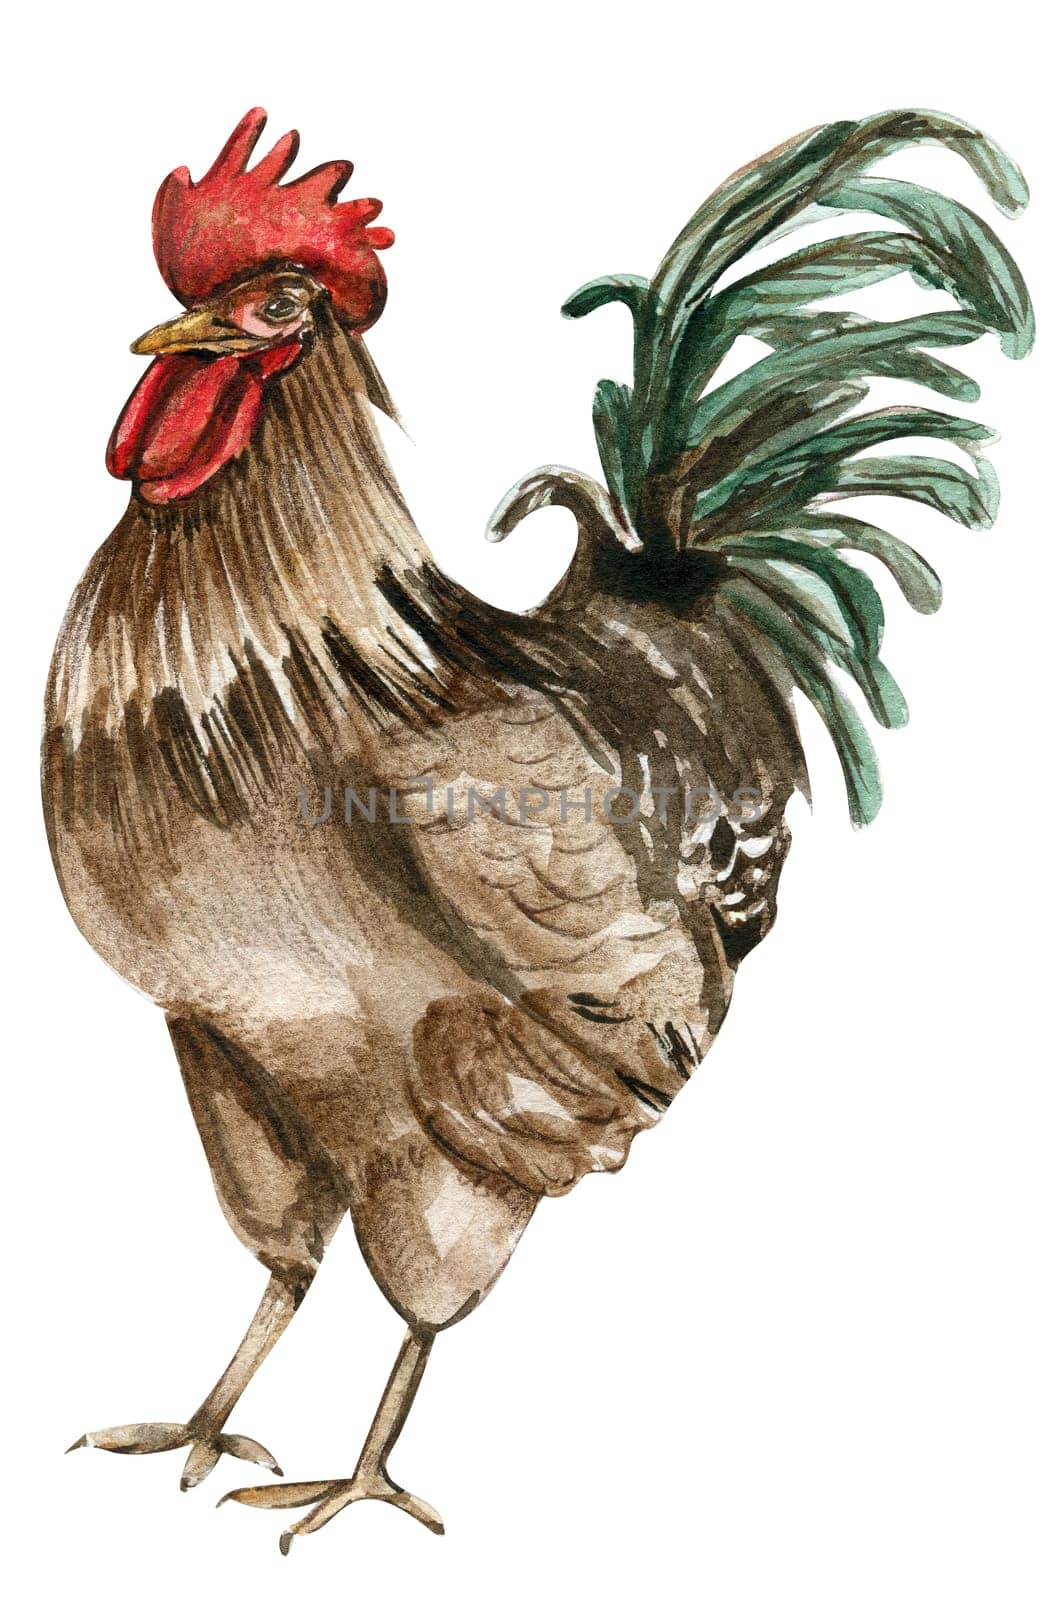 Watercolor drawing cock. Hand drawn rooster, artistic painting illustration of fowl. Watercolor illustration of hen. Perfect for wedding invitation, greetings card, posters.